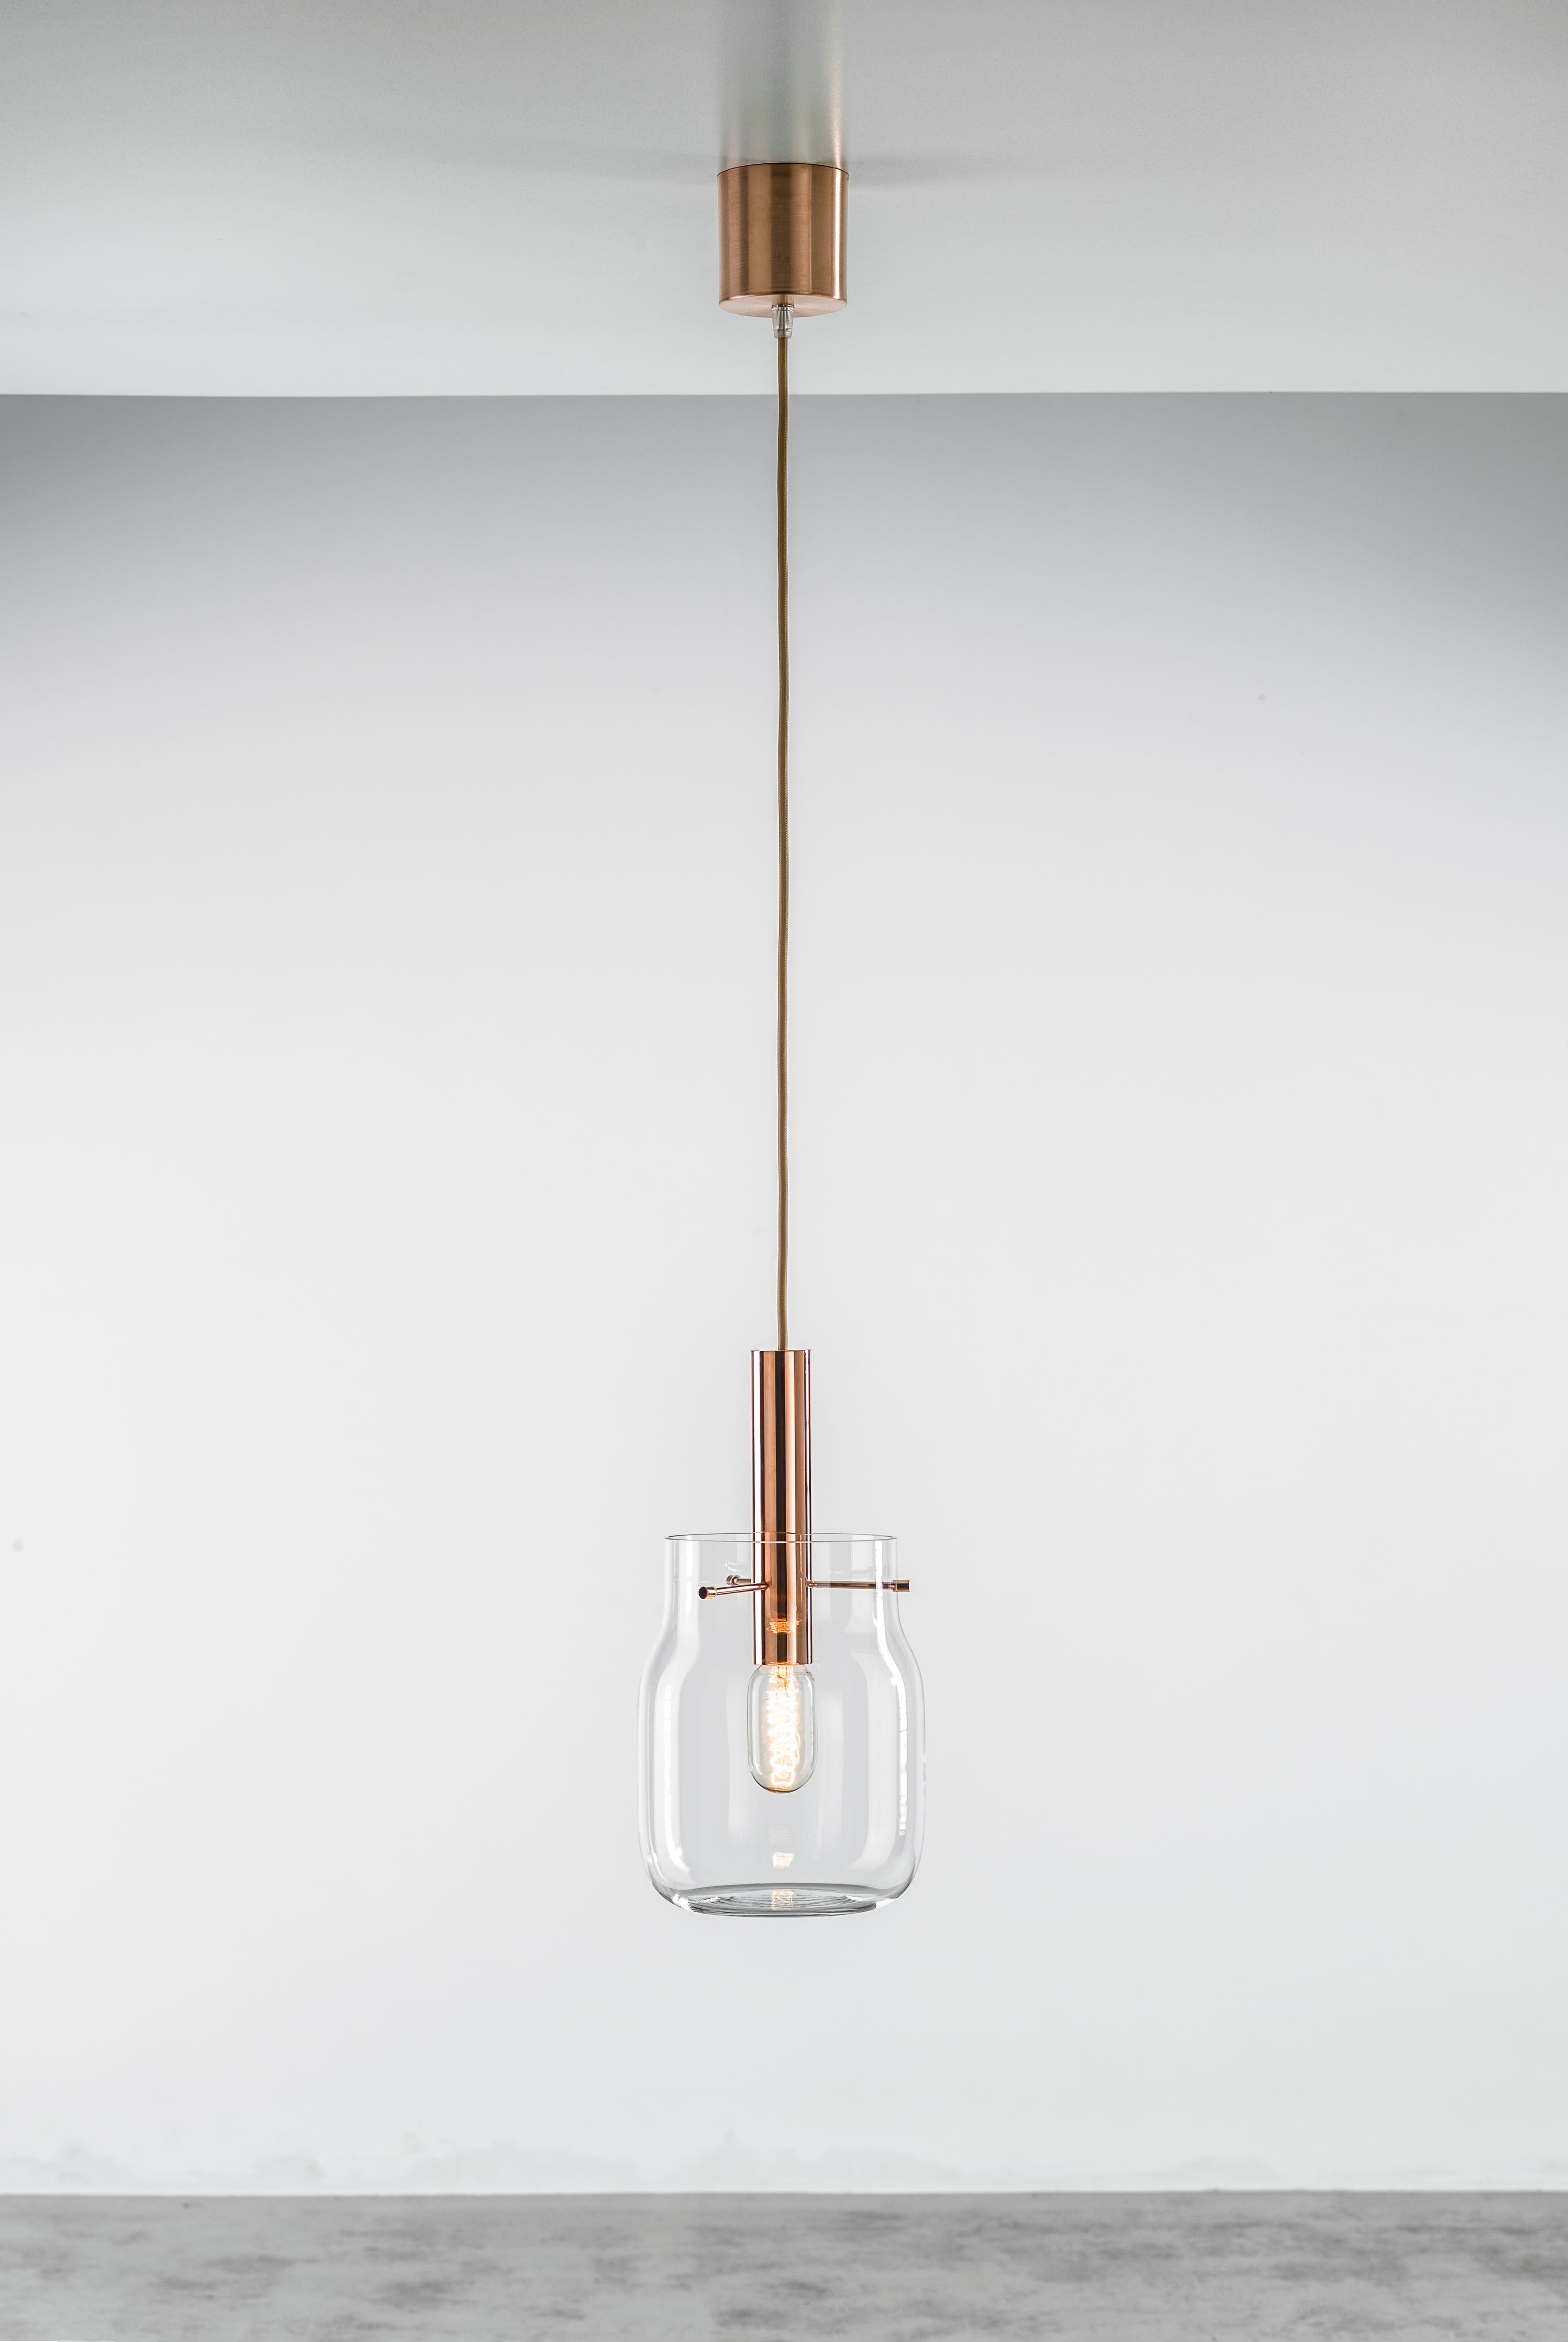 Big Bandaska pendant light by Dechem Studio
Dimensions: D 18 x H 180 cm
Materials: brass, glass.
Also available: different colours and sizes available.

hand blown into beechwood moulds, Bandaska Lights is based on the highly popular Bandaska